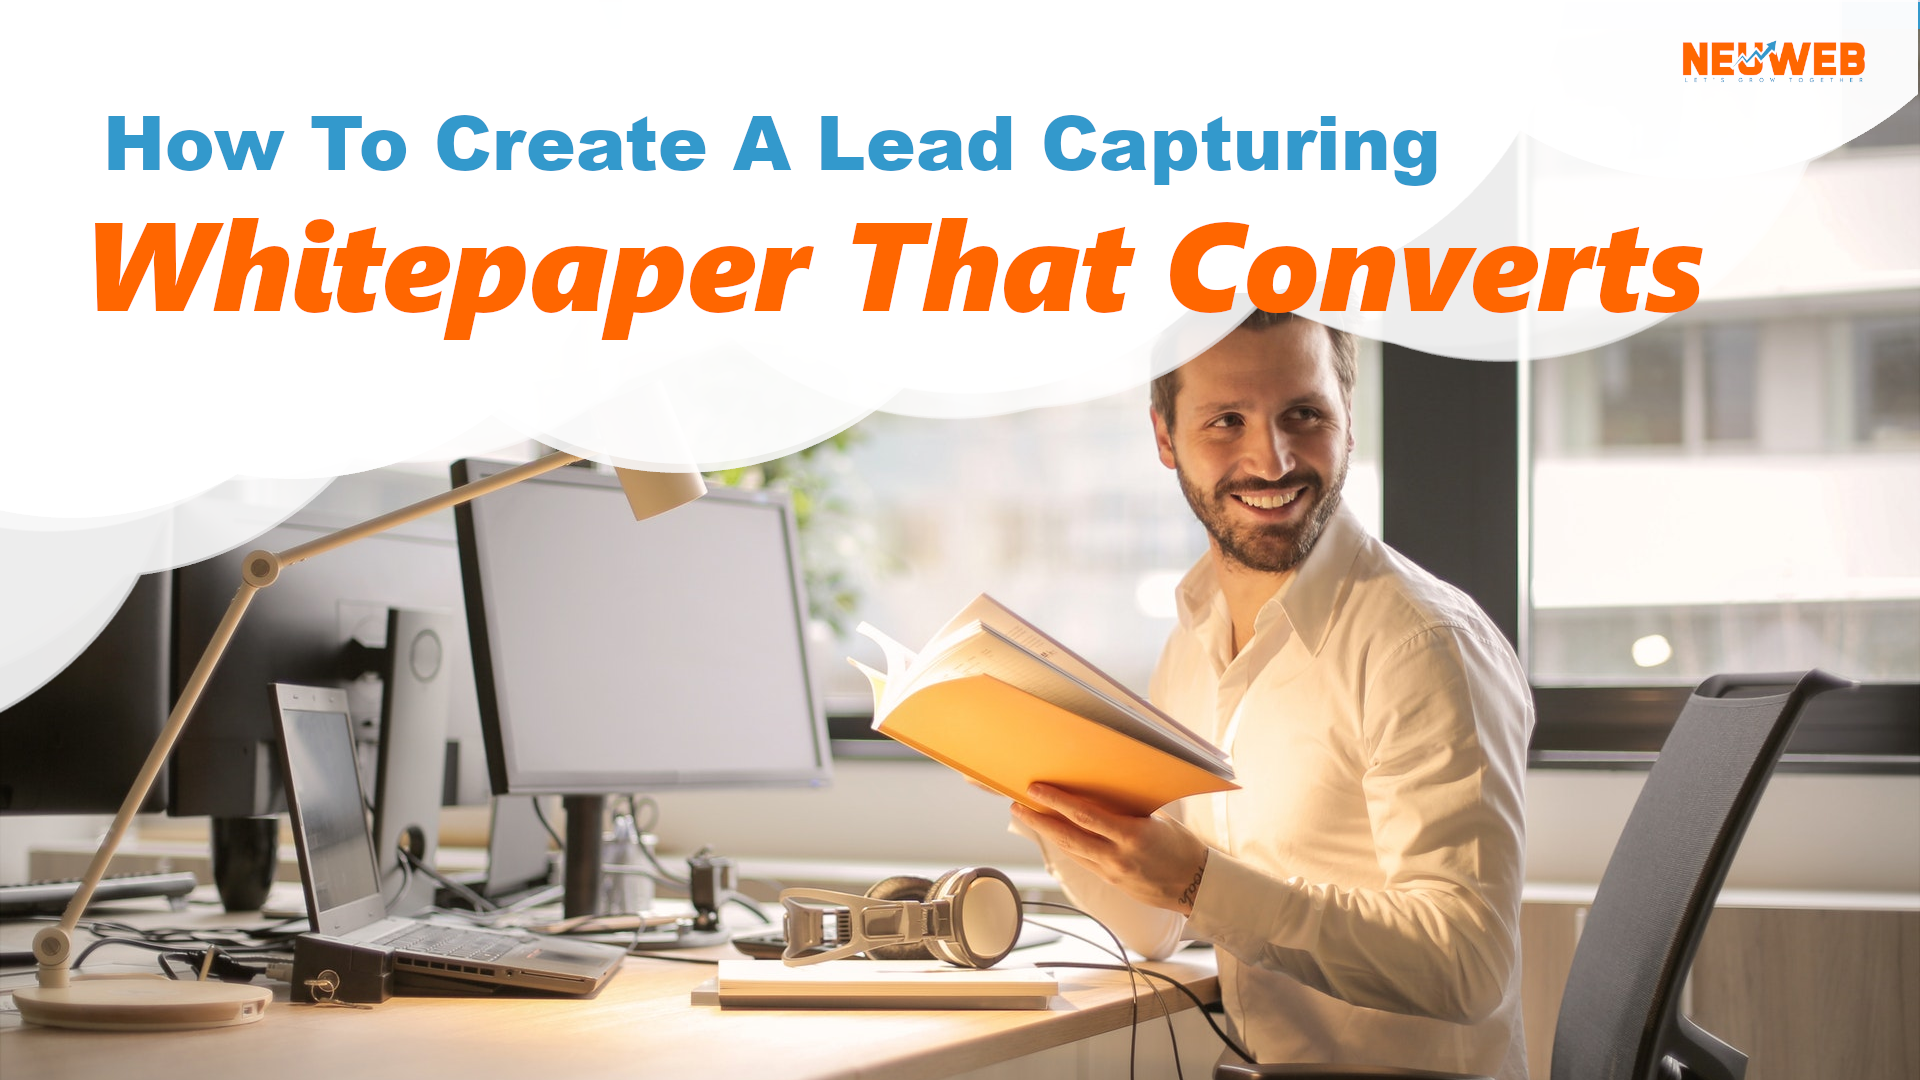 How To Write a Lead Capturing Whitepaper